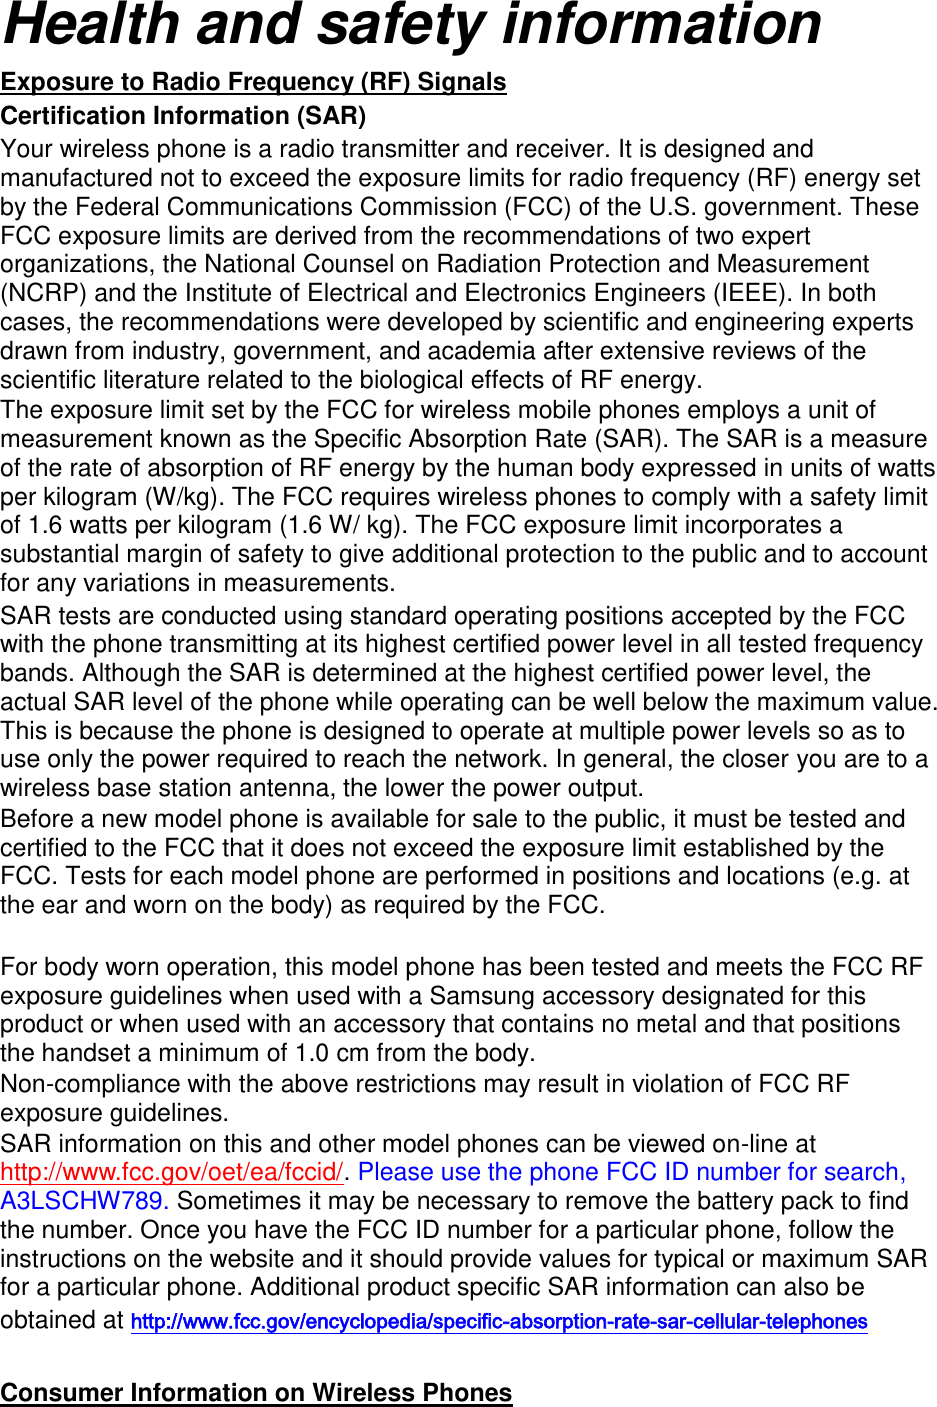 Health and safety information Exposure to Radio Frequency (RF) Signals Certification Information (SAR) Your wireless phone is a radio transmitter and receiver. It is designed and manufactured not to exceed the exposure limits for radio frequency (RF) energy set by the Federal Communications Commission (FCC) of the U.S. government. These FCC exposure limits are derived from the recommendations of two expert organizations, the National Counsel on Radiation Protection and Measurement (NCRP) and the Institute of Electrical and Electronics Engineers (IEEE). In both cases, the recommendations were developed by scientific and engineering experts drawn from industry, government, and academia after extensive reviews of the scientific literature related to the biological effects of RF energy. The exposure limit set by the FCC for wireless mobile phones employs a unit of measurement known as the Specific Absorption Rate (SAR). The SAR is a measure of the rate of absorption of RF energy by the human body expressed in units of watts per kilogram (W/kg). The FCC requires wireless phones to comply with a safety limit of 1.6 watts per kilogram (1.6 W/ kg). The FCC exposure limit incorporates a substantial margin of safety to give additional protection to the public and to account for any variations in measurements. SAR tests are conducted using standard operating positions accepted by the FCC with the phone transmitting at its highest certified power level in all tested frequency bands. Although the SAR is determined at the highest certified power level, the actual SAR level of the phone while operating can be well below the maximum value. This is because the phone is designed to operate at multiple power levels so as to use only the power required to reach the network. In general, the closer you are to a wireless base station antenna, the lower the power output. Before a new model phone is available for sale to the public, it must be tested and certified to the FCC that it does not exceed the exposure limit established by the FCC. Tests for each model phone are performed in positions and locations (e.g. at the ear and worn on the body) as required by the FCC.      For body worn operation, this model phone has been tested and meets the FCC RF exposure guidelines when used with a Samsung accessory designated for this product or when used with an accessory that contains no metal and that positions the handset a minimum of 1.0 cm from the body.   Non-compliance with the above restrictions may result in violation of FCC RF exposure guidelines. SAR information on this and other model phones can be viewed on-line at http://www.fcc.gov/oet/ea/fccid/. Please use the phone FCC ID number for search, A3LSCHW789. Sometimes it may be necessary to remove the battery pack to find the number. Once you have the FCC ID number for a particular phone, follow the instructions on the website and it should provide values for typical or maximum SAR for a particular phone. Additional product specific SAR information can also be obtained at http://www.fcc.gov/encyclopedia/specific-absorption-rate-sar-cellular-telephones  Consumer Information on Wireless Phones 